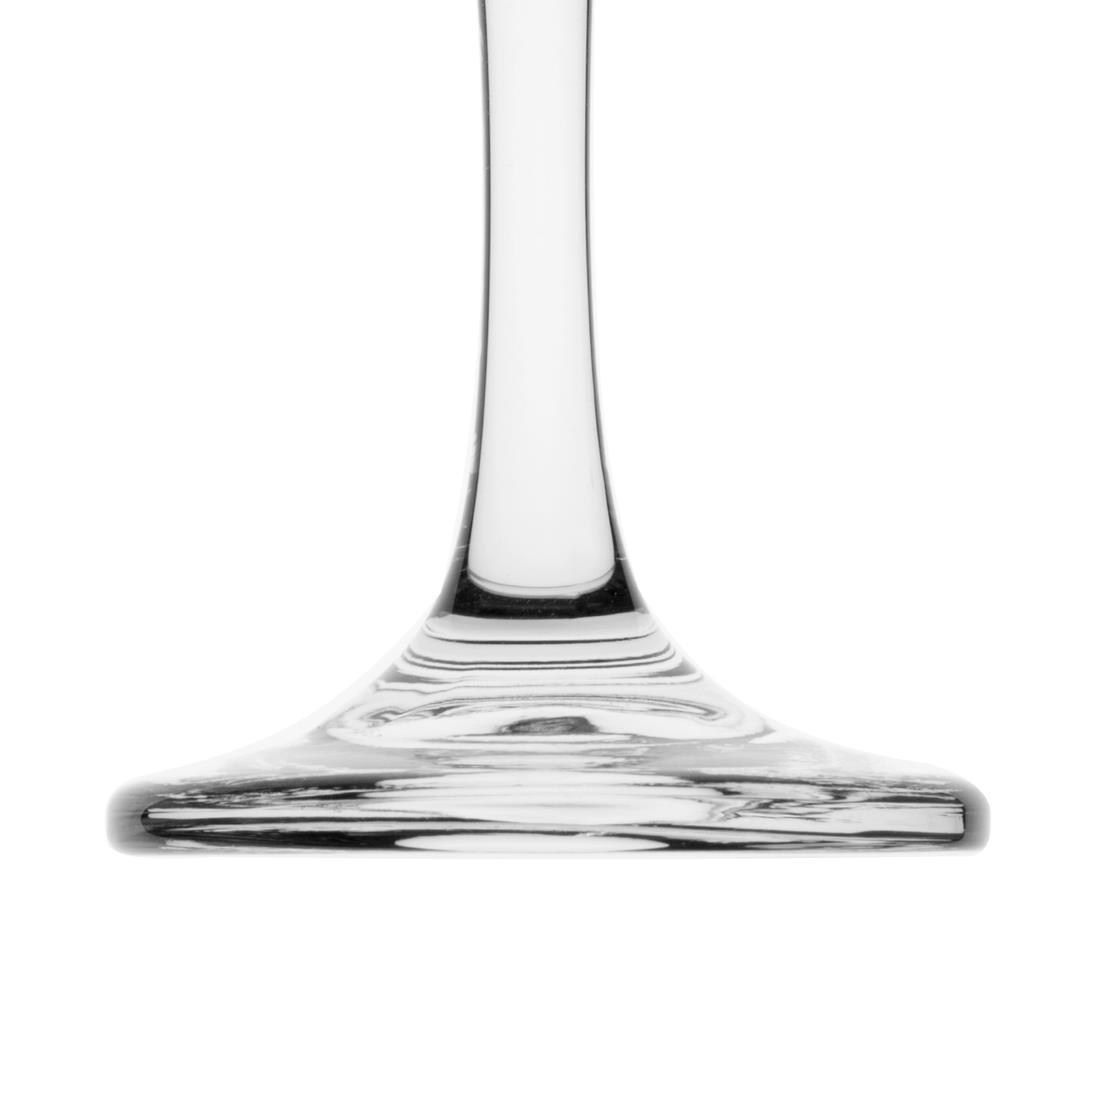 Olympia Solar Wine Glasses 310ml (Pack of 96) - GD325  - 3